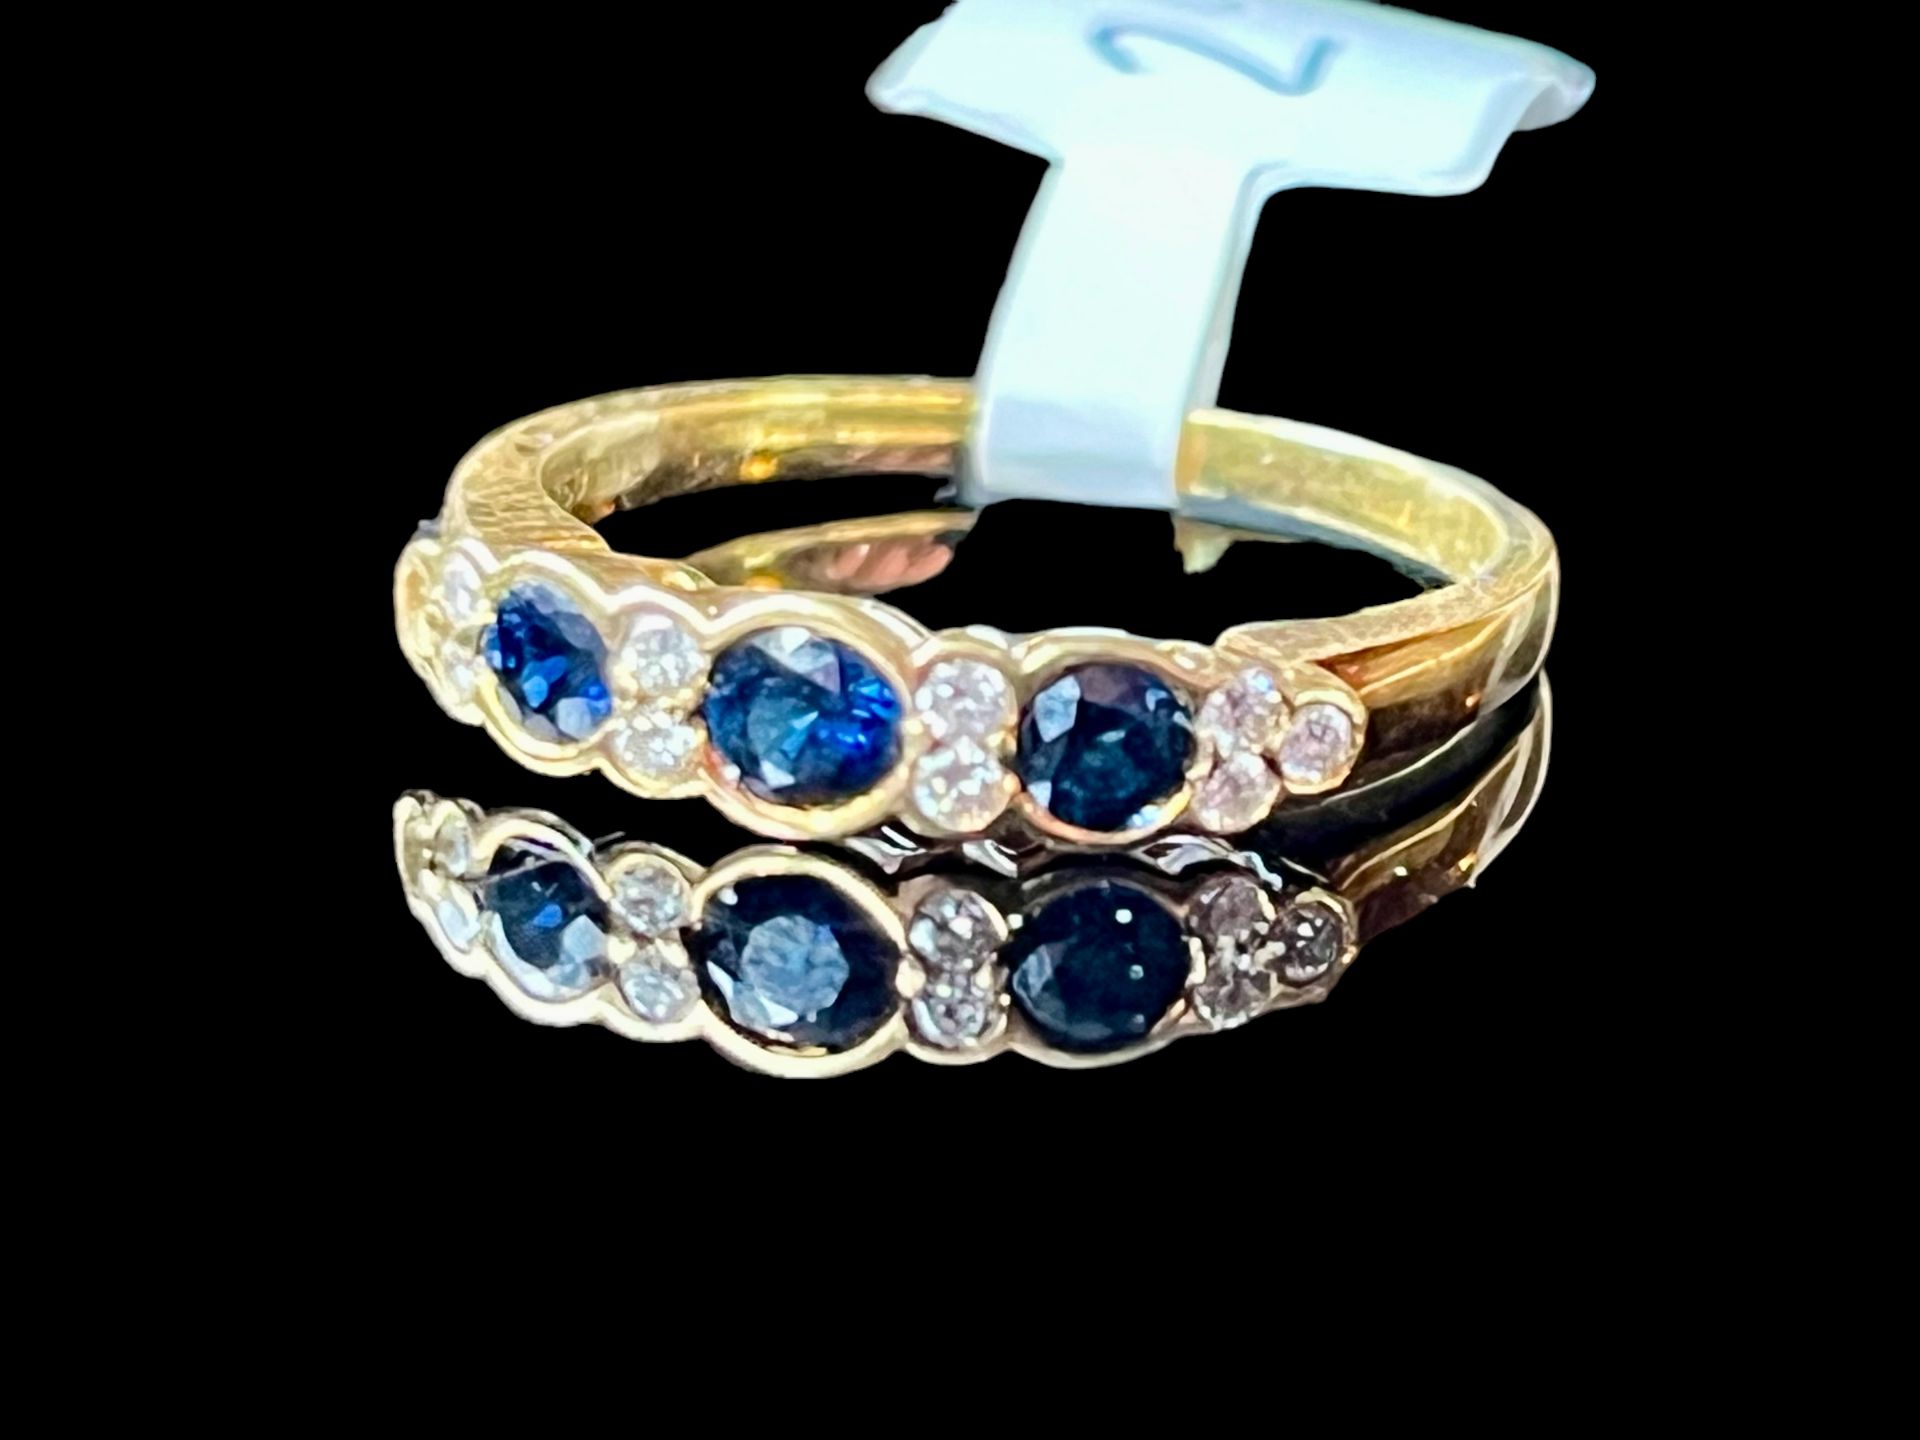 18ct gold diamond and sapphire half eternity ring, size P, total weight 3.15g - has a very small